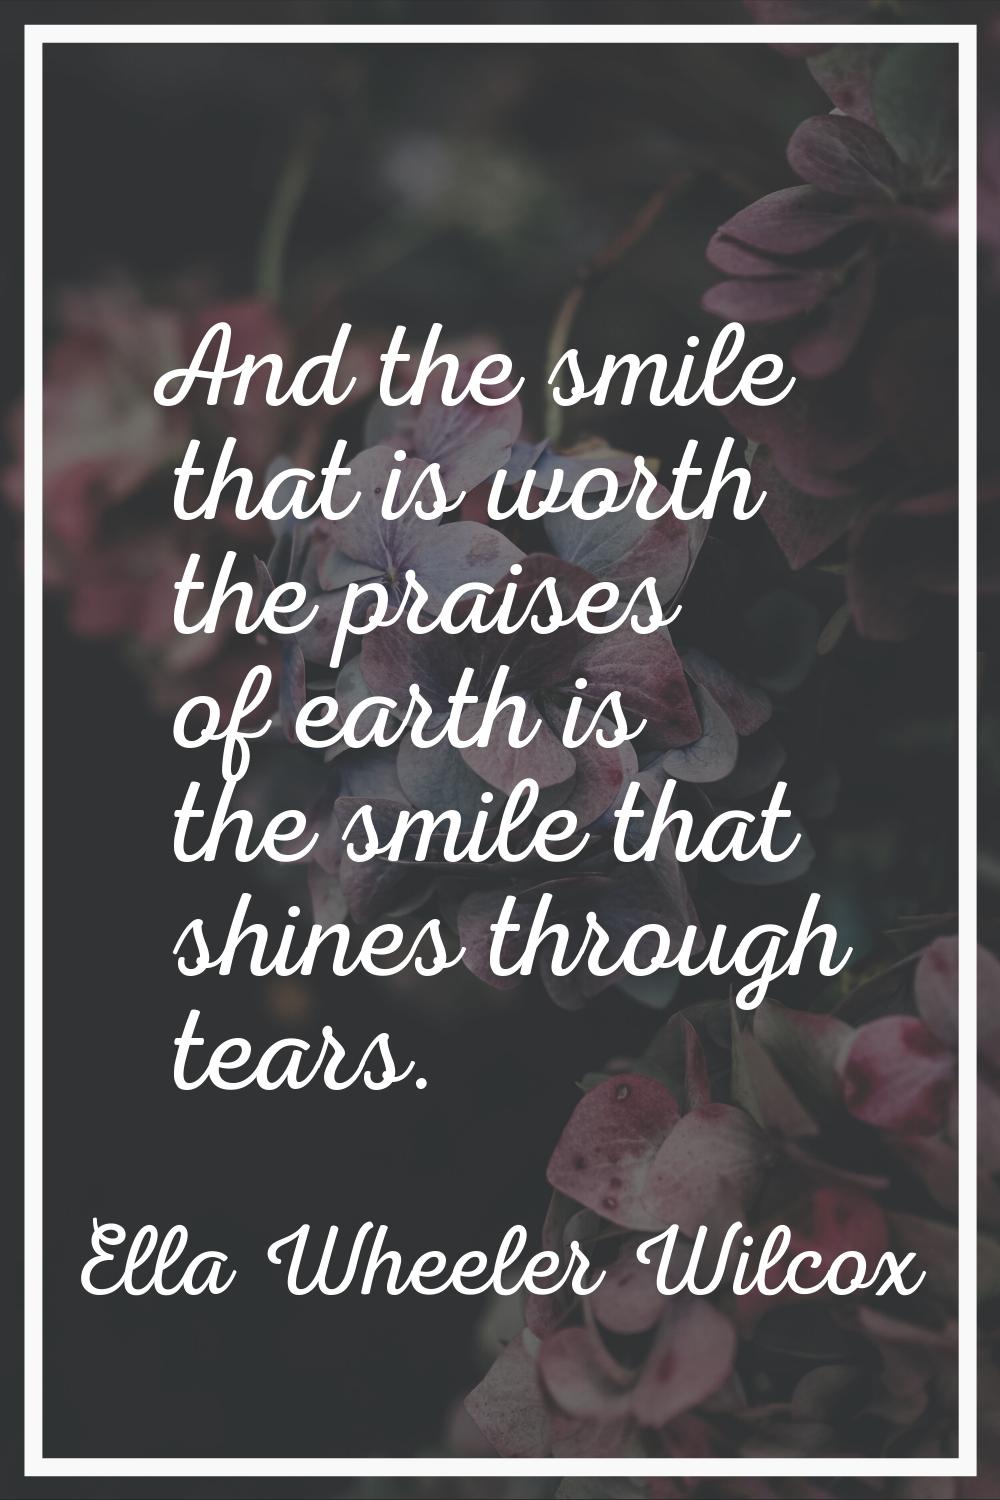 And the smile that is worth the praises of earth is the smile that shines through tears.